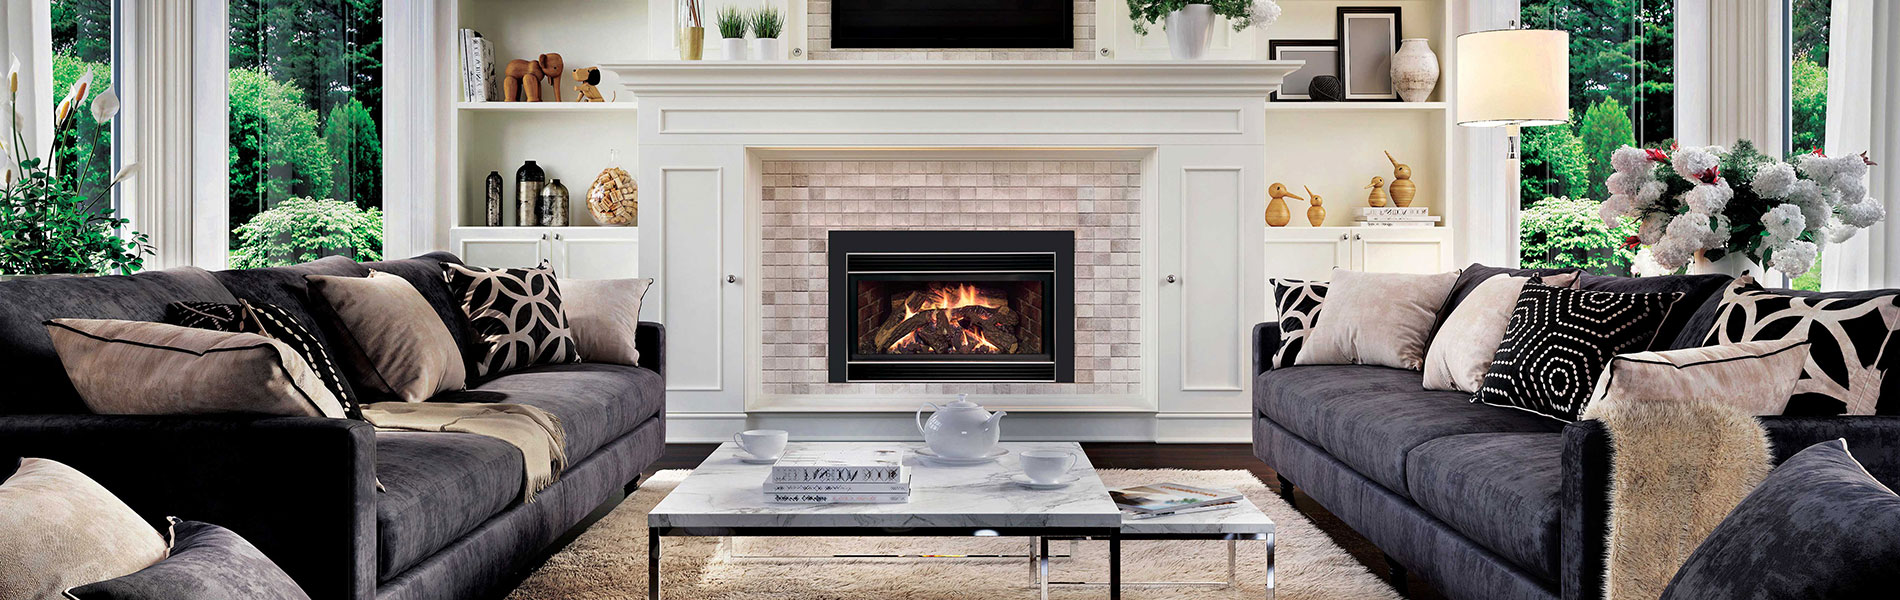 “Elevate Your Warmth: The Advantages of Gas Fireplace Inserts